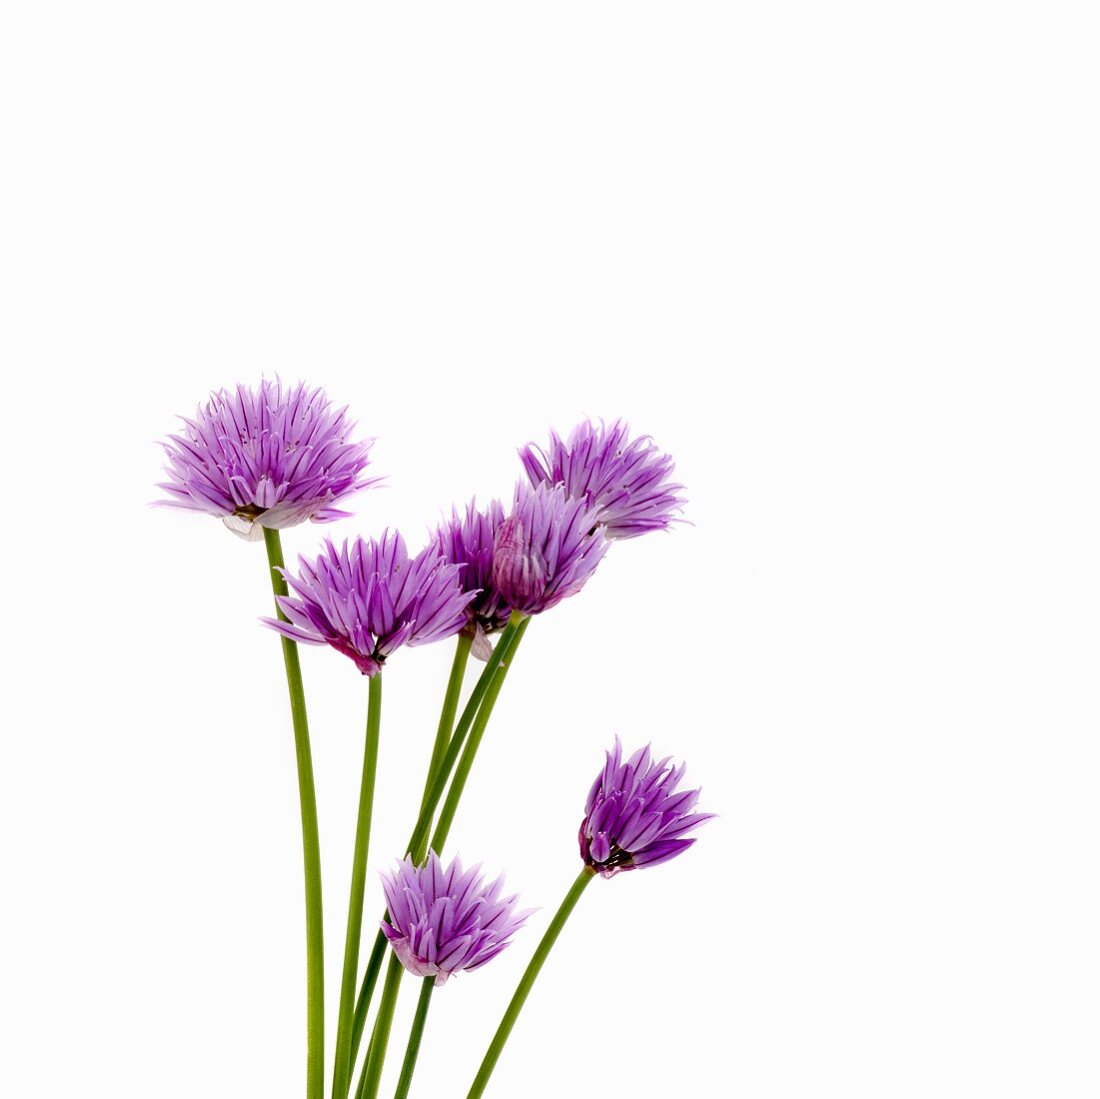 Several chive flowers